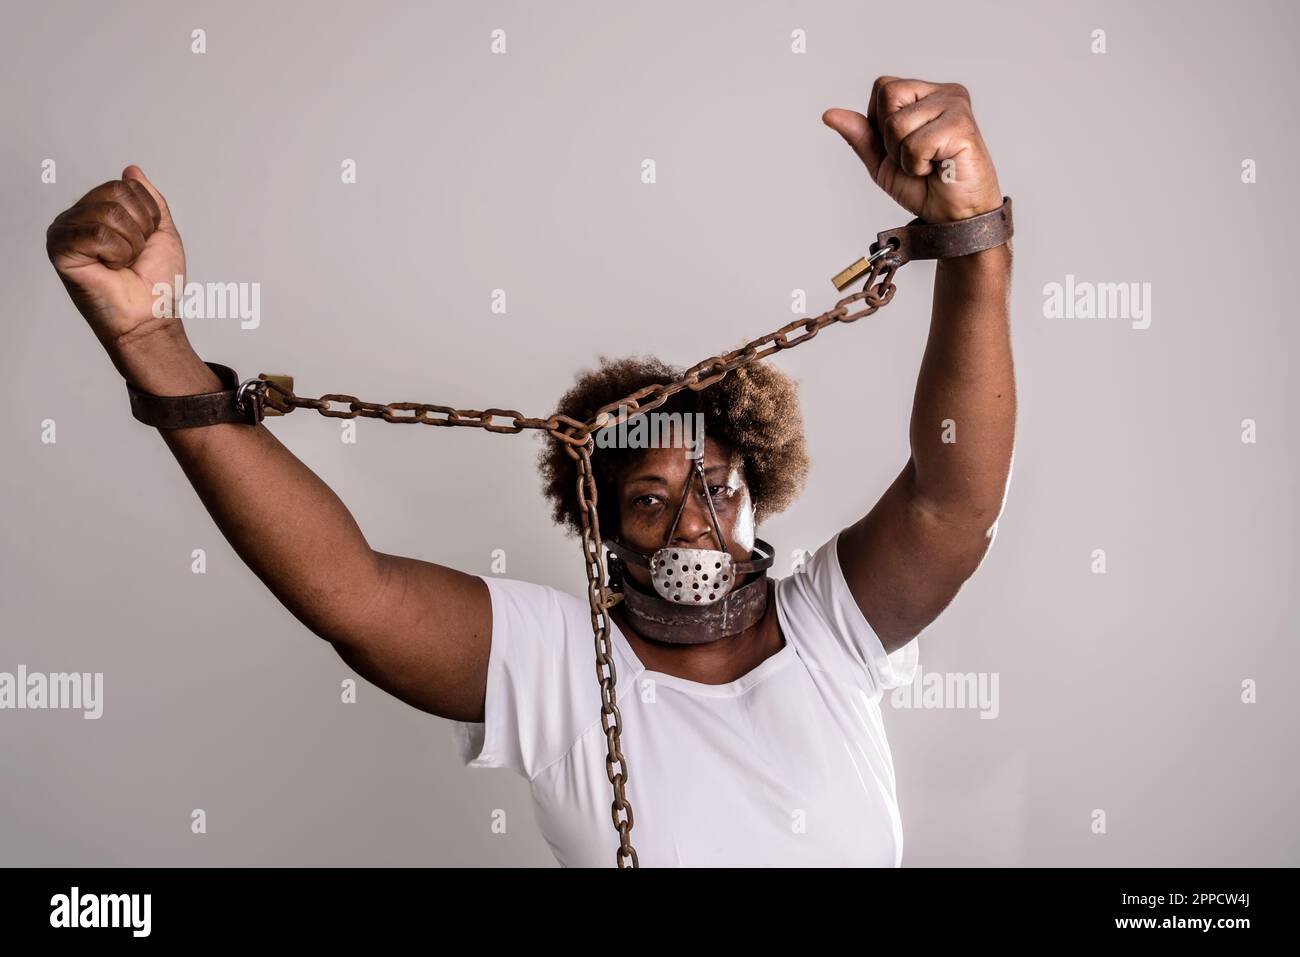 Woman Trapped In Chains. Photography Symbolizing Captivity Or Violence  Against Woman. Stock Photo, Picture and Royalty Free Image. Image 146416623.